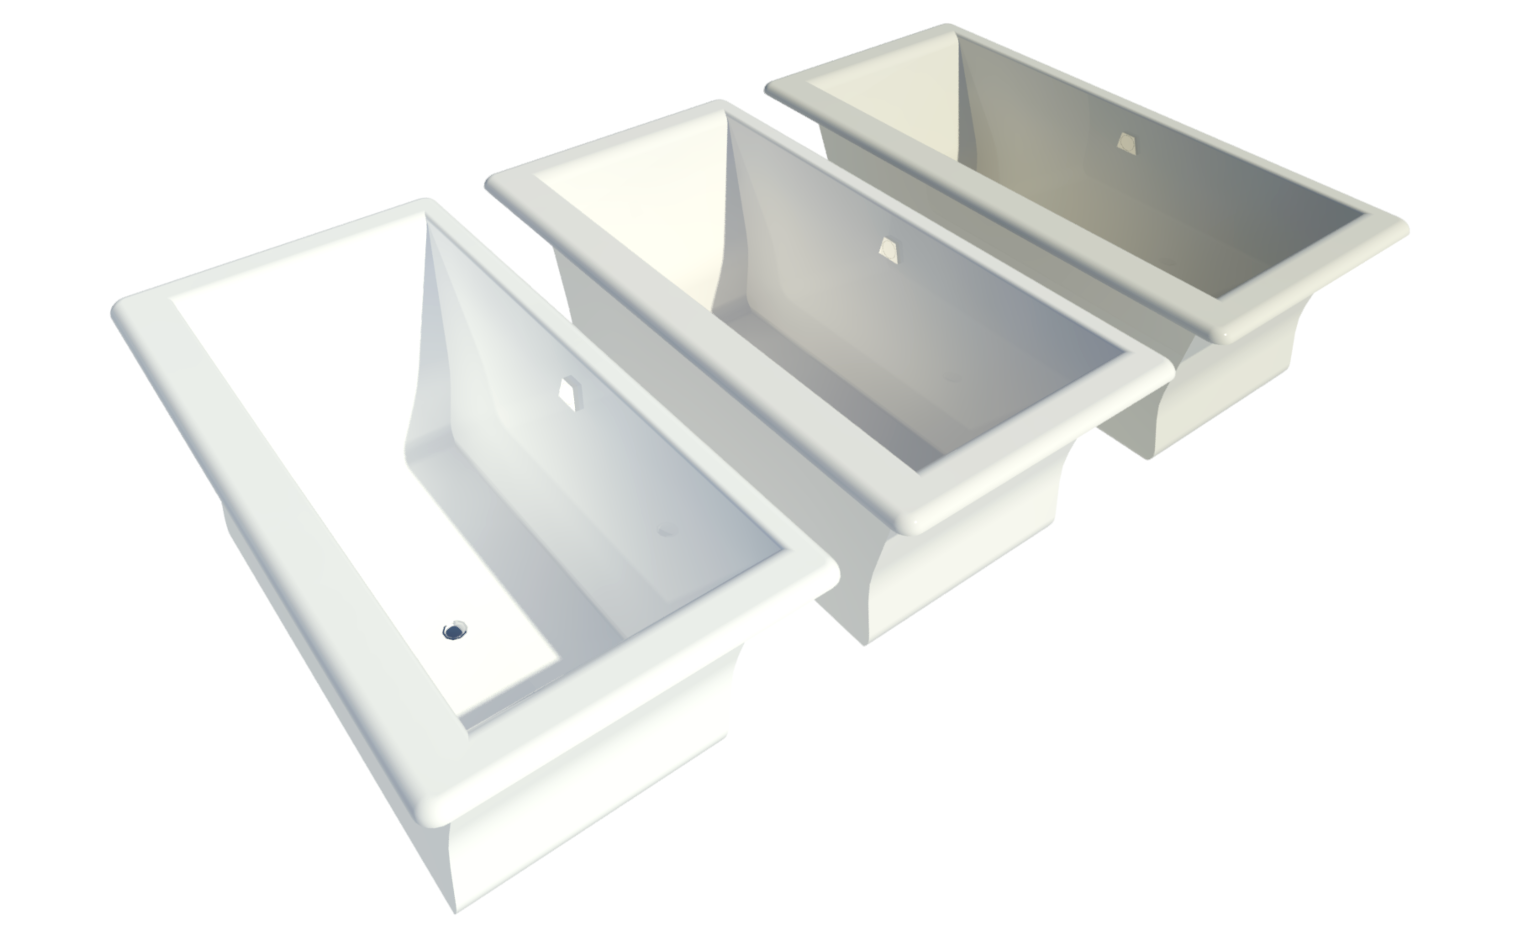 Revit raytrace showing a render of the rectangular Seamount drop-in bathtub in white, almond and biscuit.